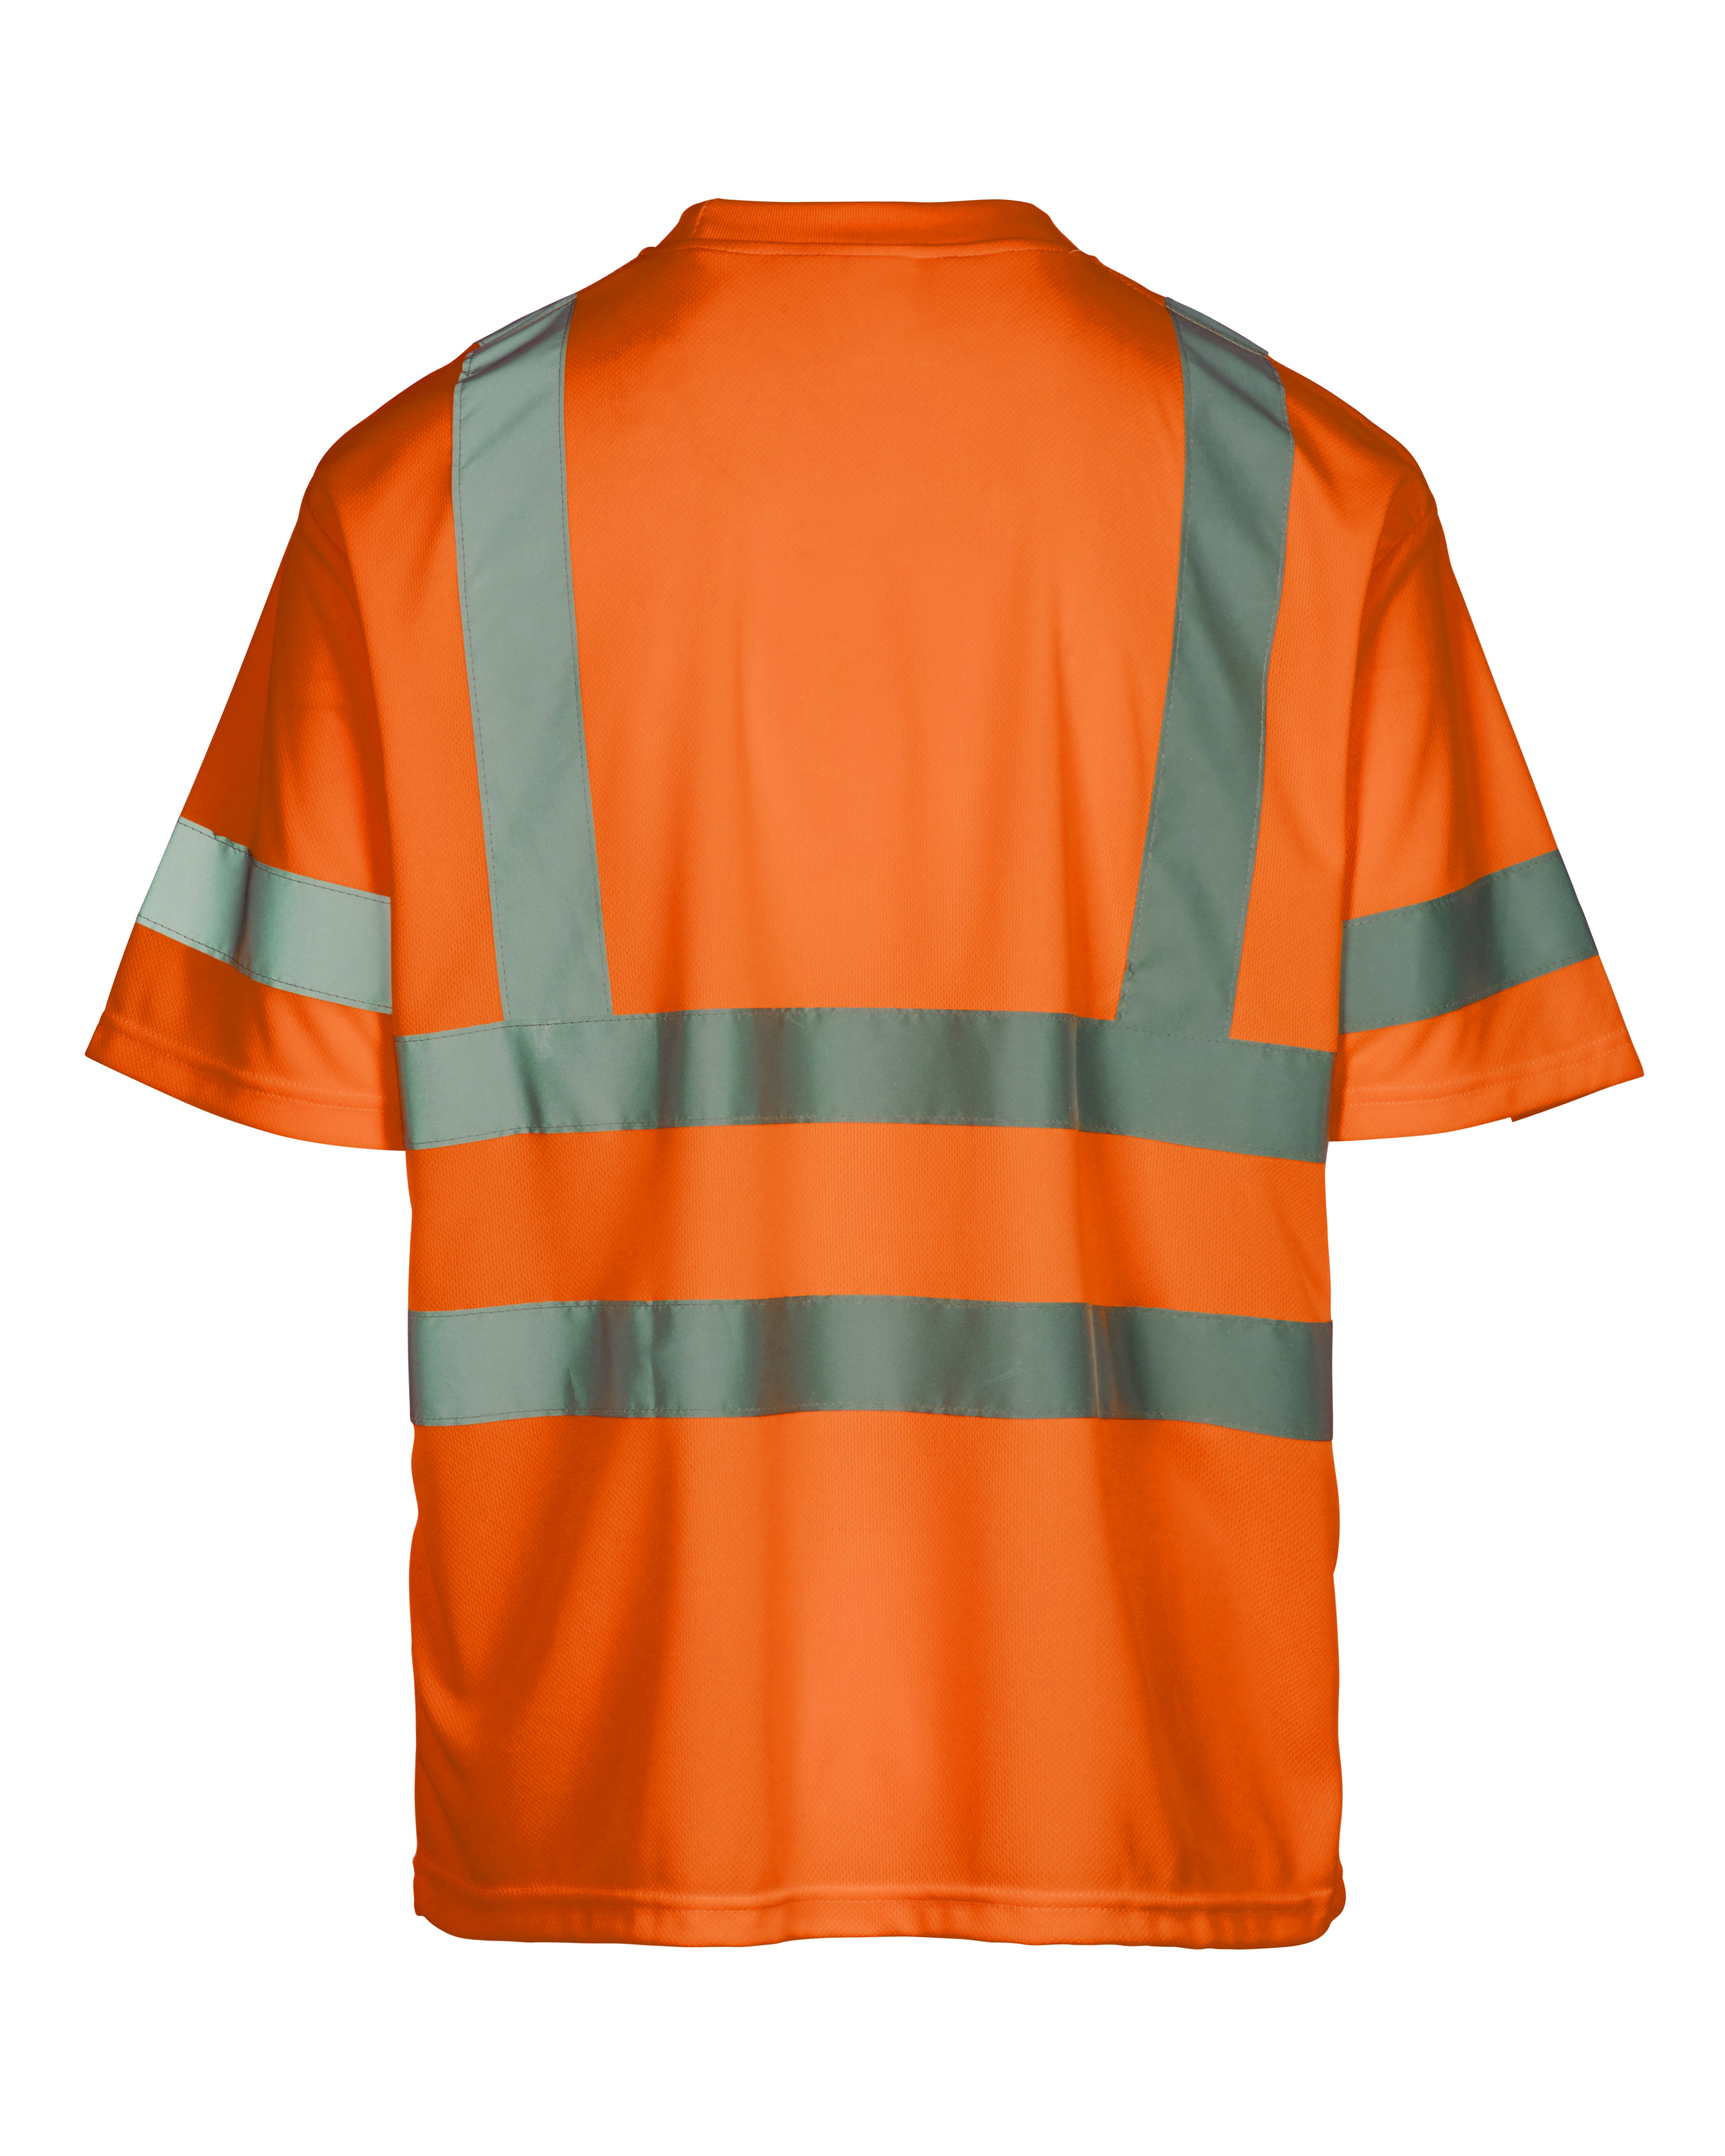 Picture of Max Apparel MAX480 Class 3 T-shirt, Safety Orange